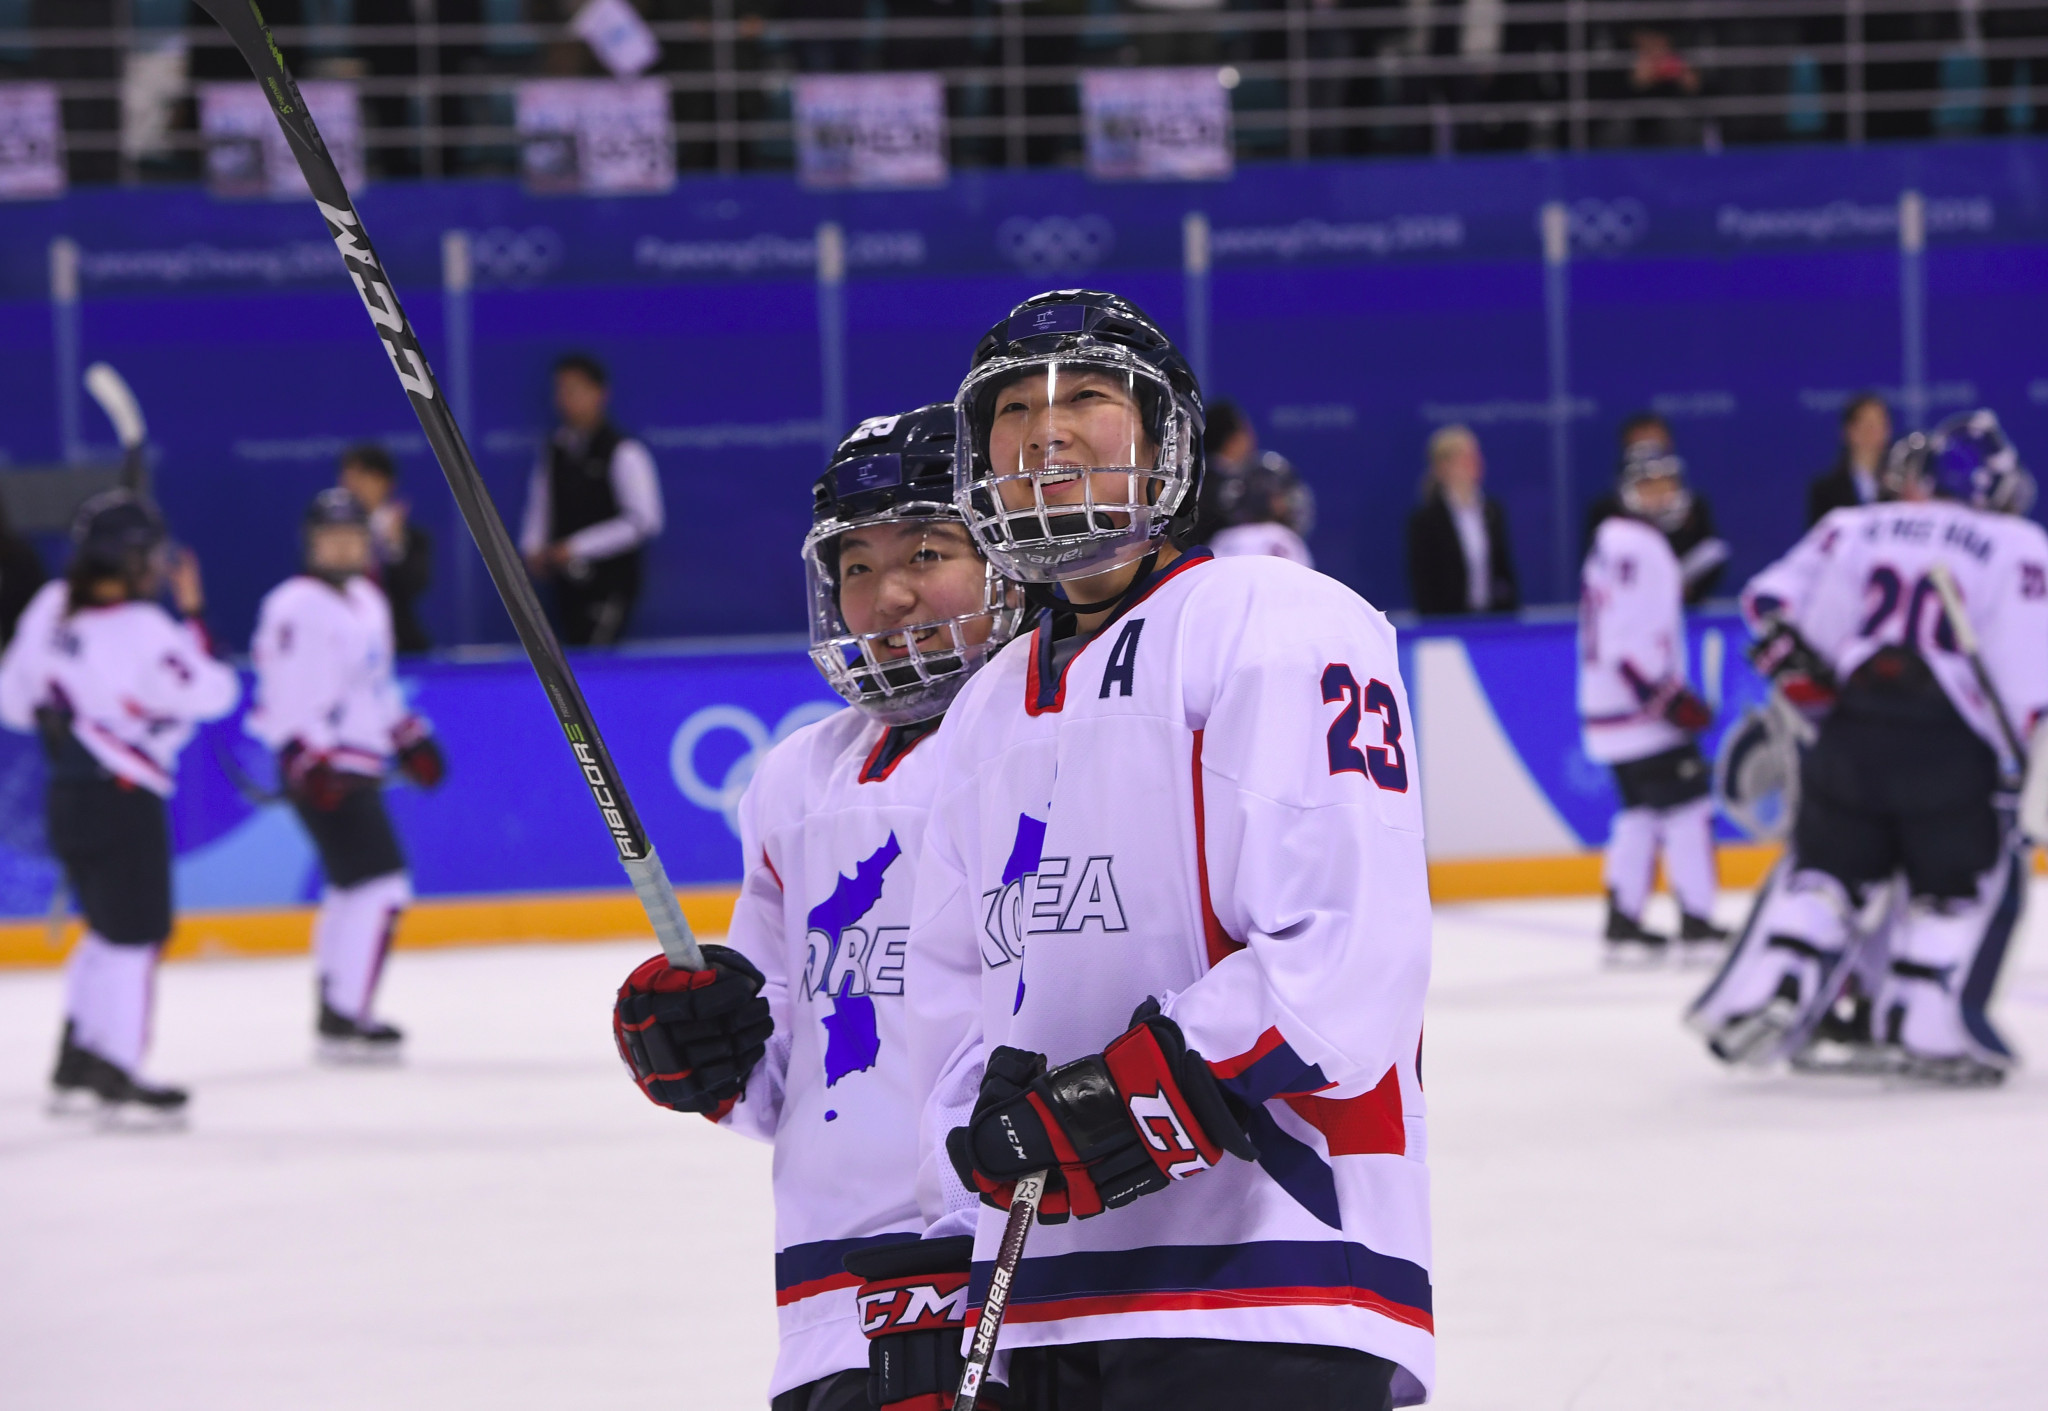 Korea formed a unified women's ice hockey team at Pyeongchang 2018 ©Getty Images